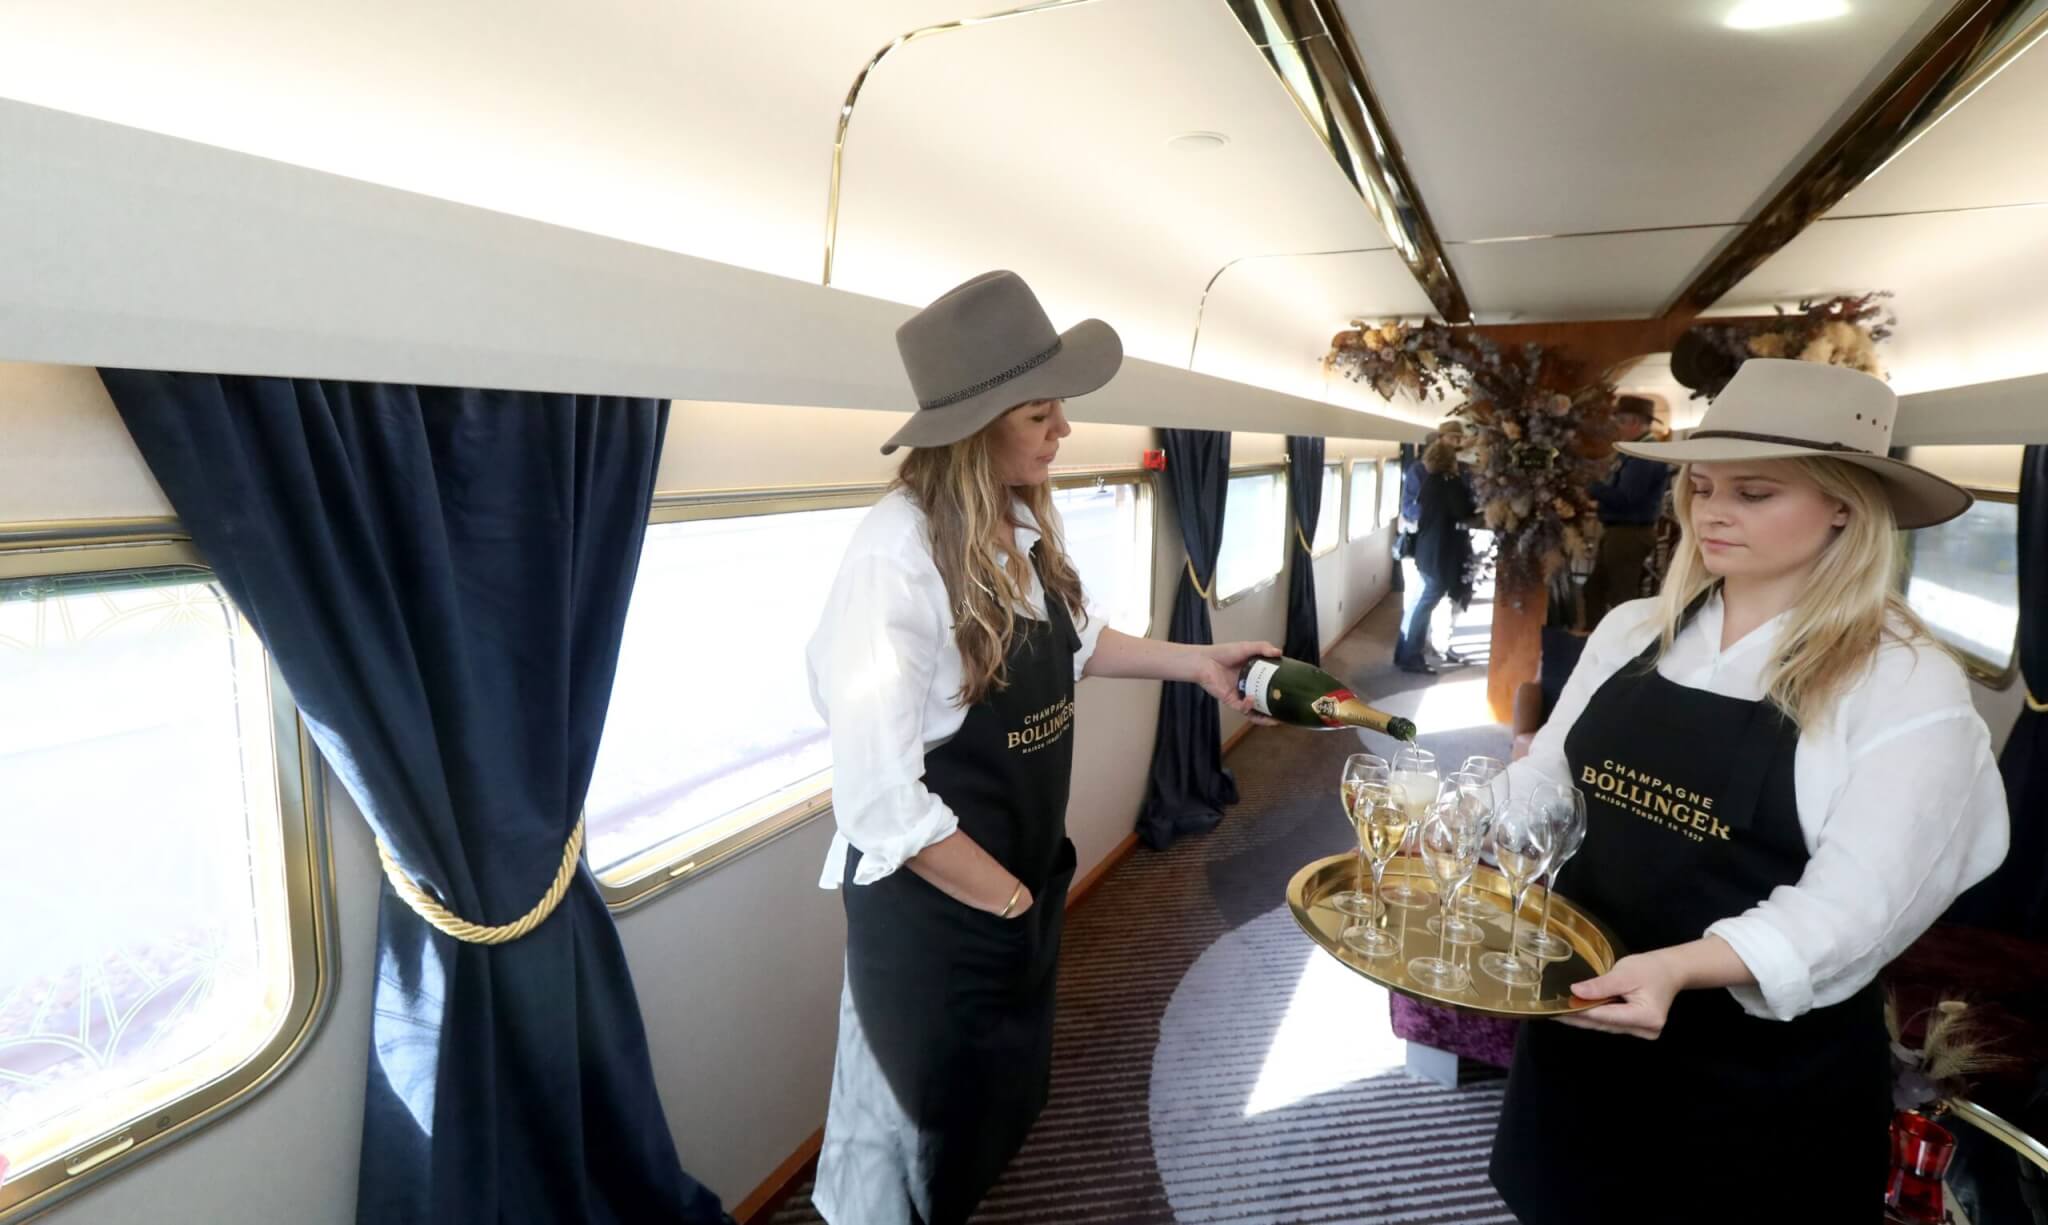 Cabin crew of Australian passenger train The Ghan serve champaign before leaving for Darwin in Adelaide, South Australia, Australia, 04 August 2019. The Ghan train service marks 90 years of operations on 04 August 2019, with a special service leaving Adelaide for Darwin. The transcontinental railway service runs between the cities of Adelaide, Alice Springs and Darwin traveling on the Adelaide-Darwin railway for 2,979 km.